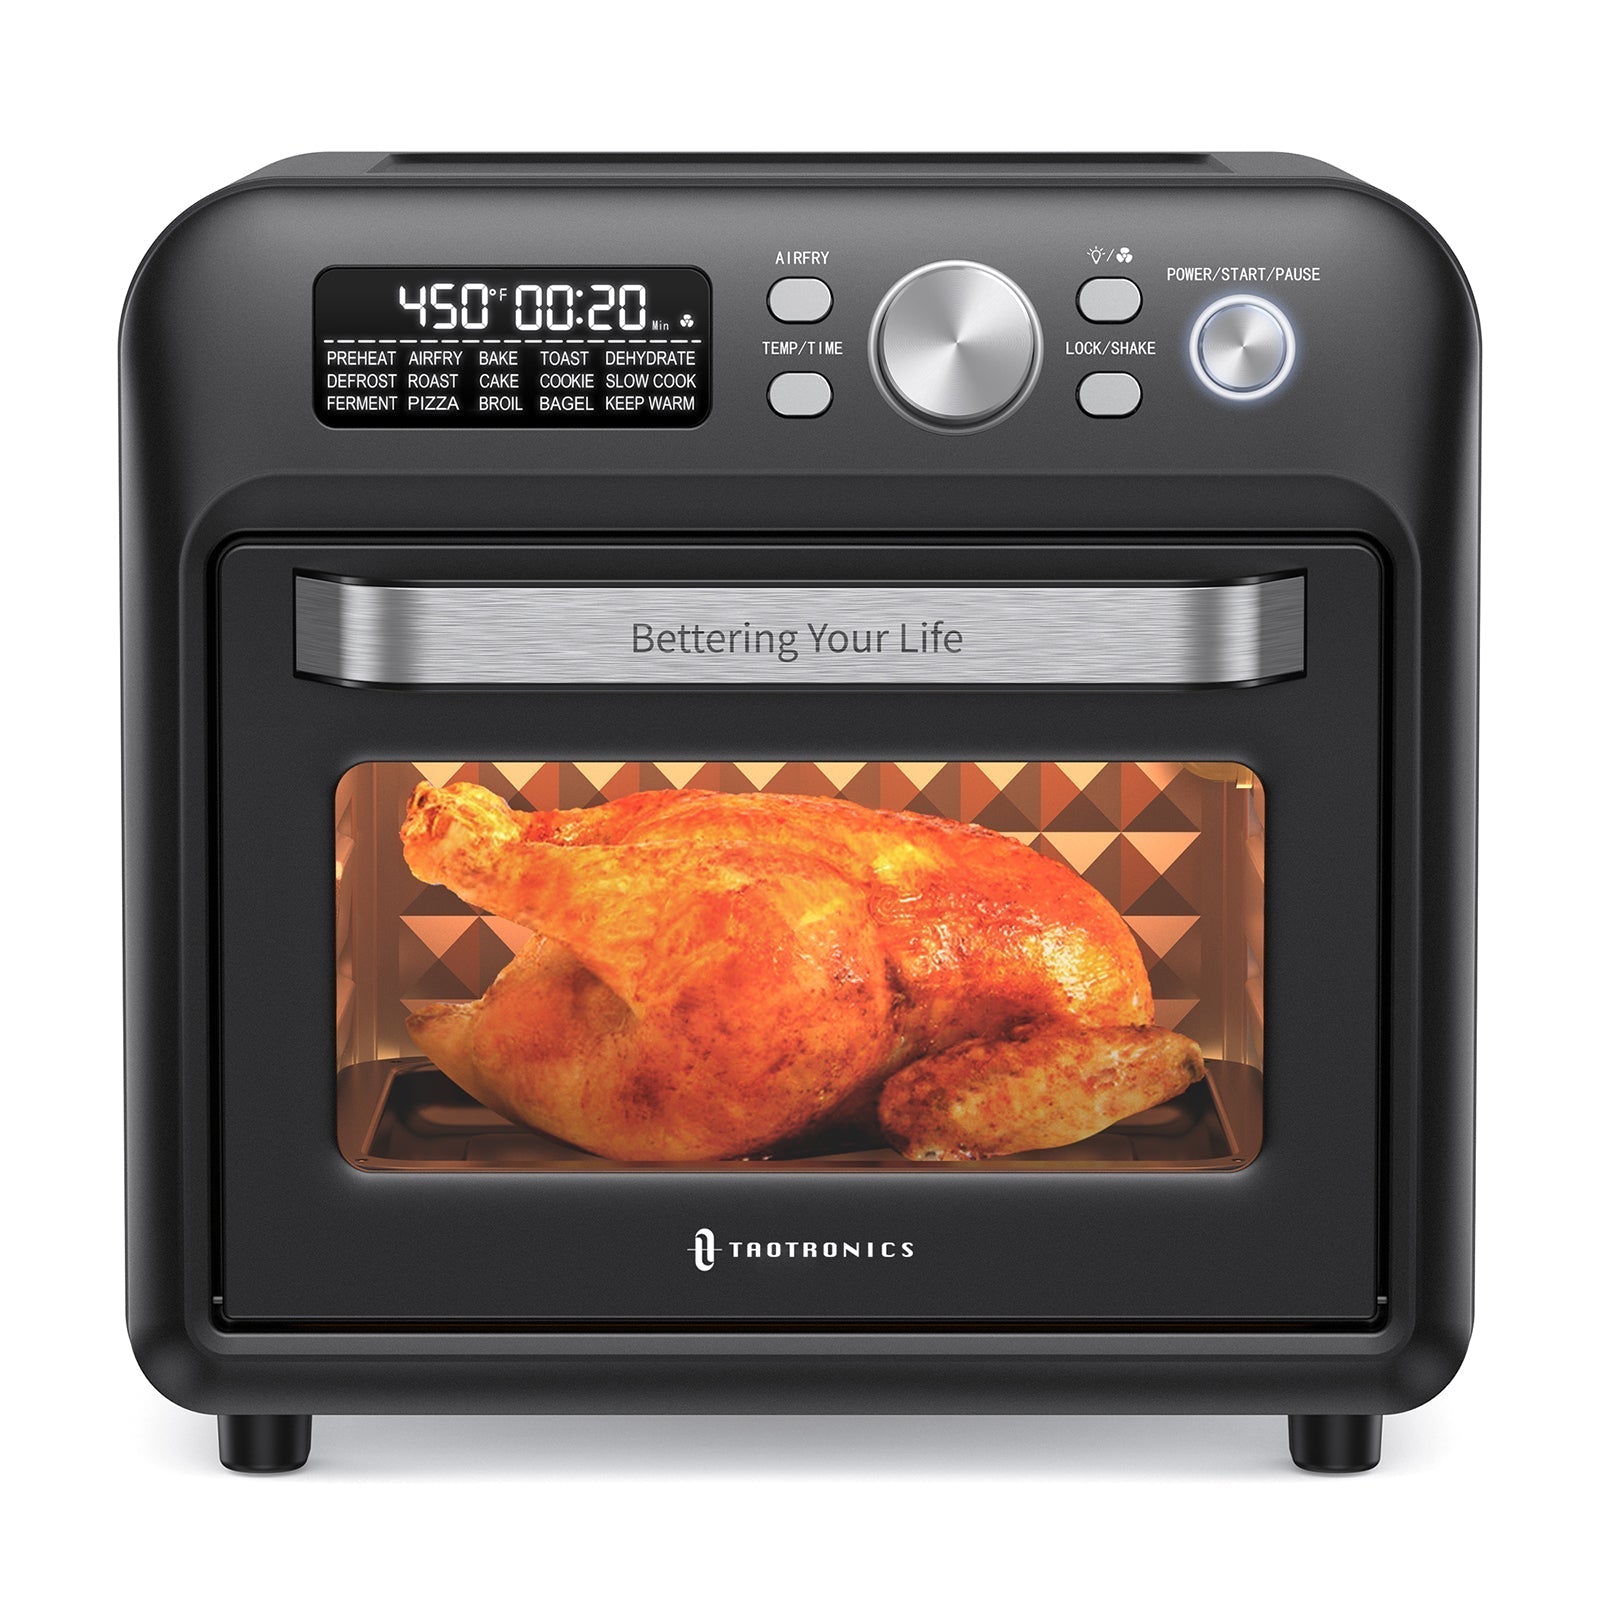 Taotronics Air Fryer 012, 19 Quart 15-in-1 Family-Sized Toaster Oven WM